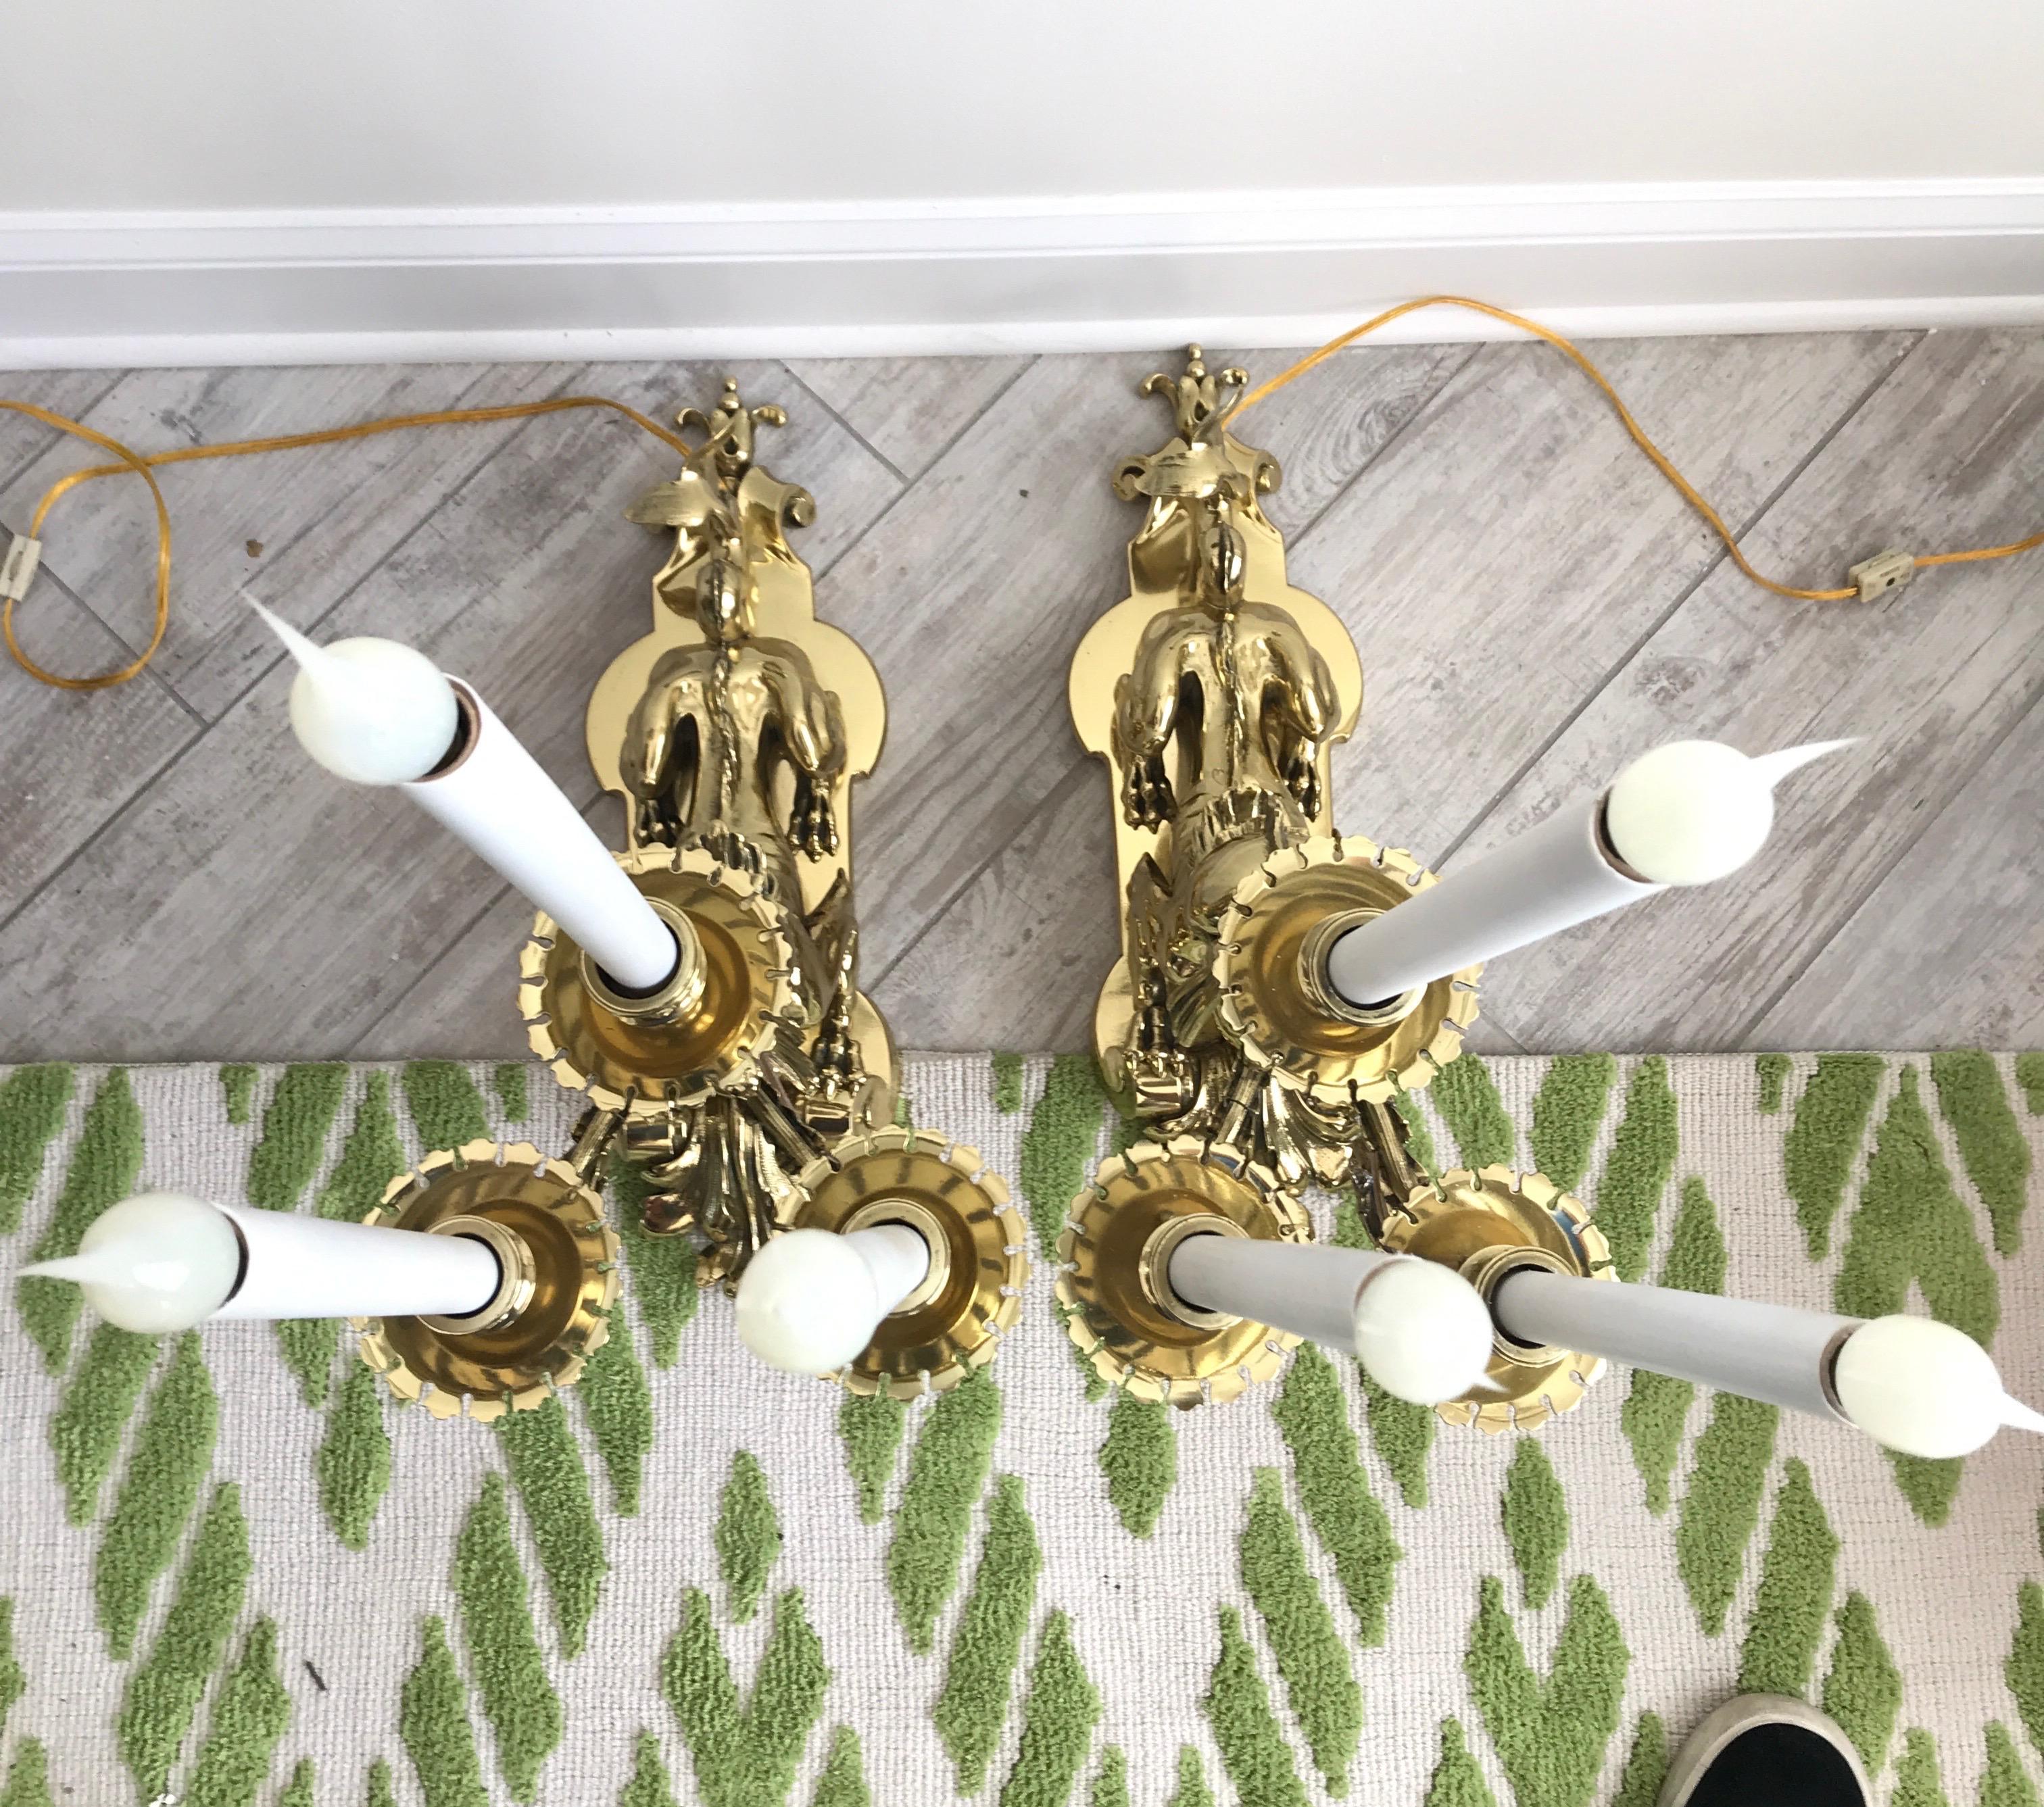 Pair of Early 20th Century Solid Brass Sea Urchin Candelabra For Sale 12